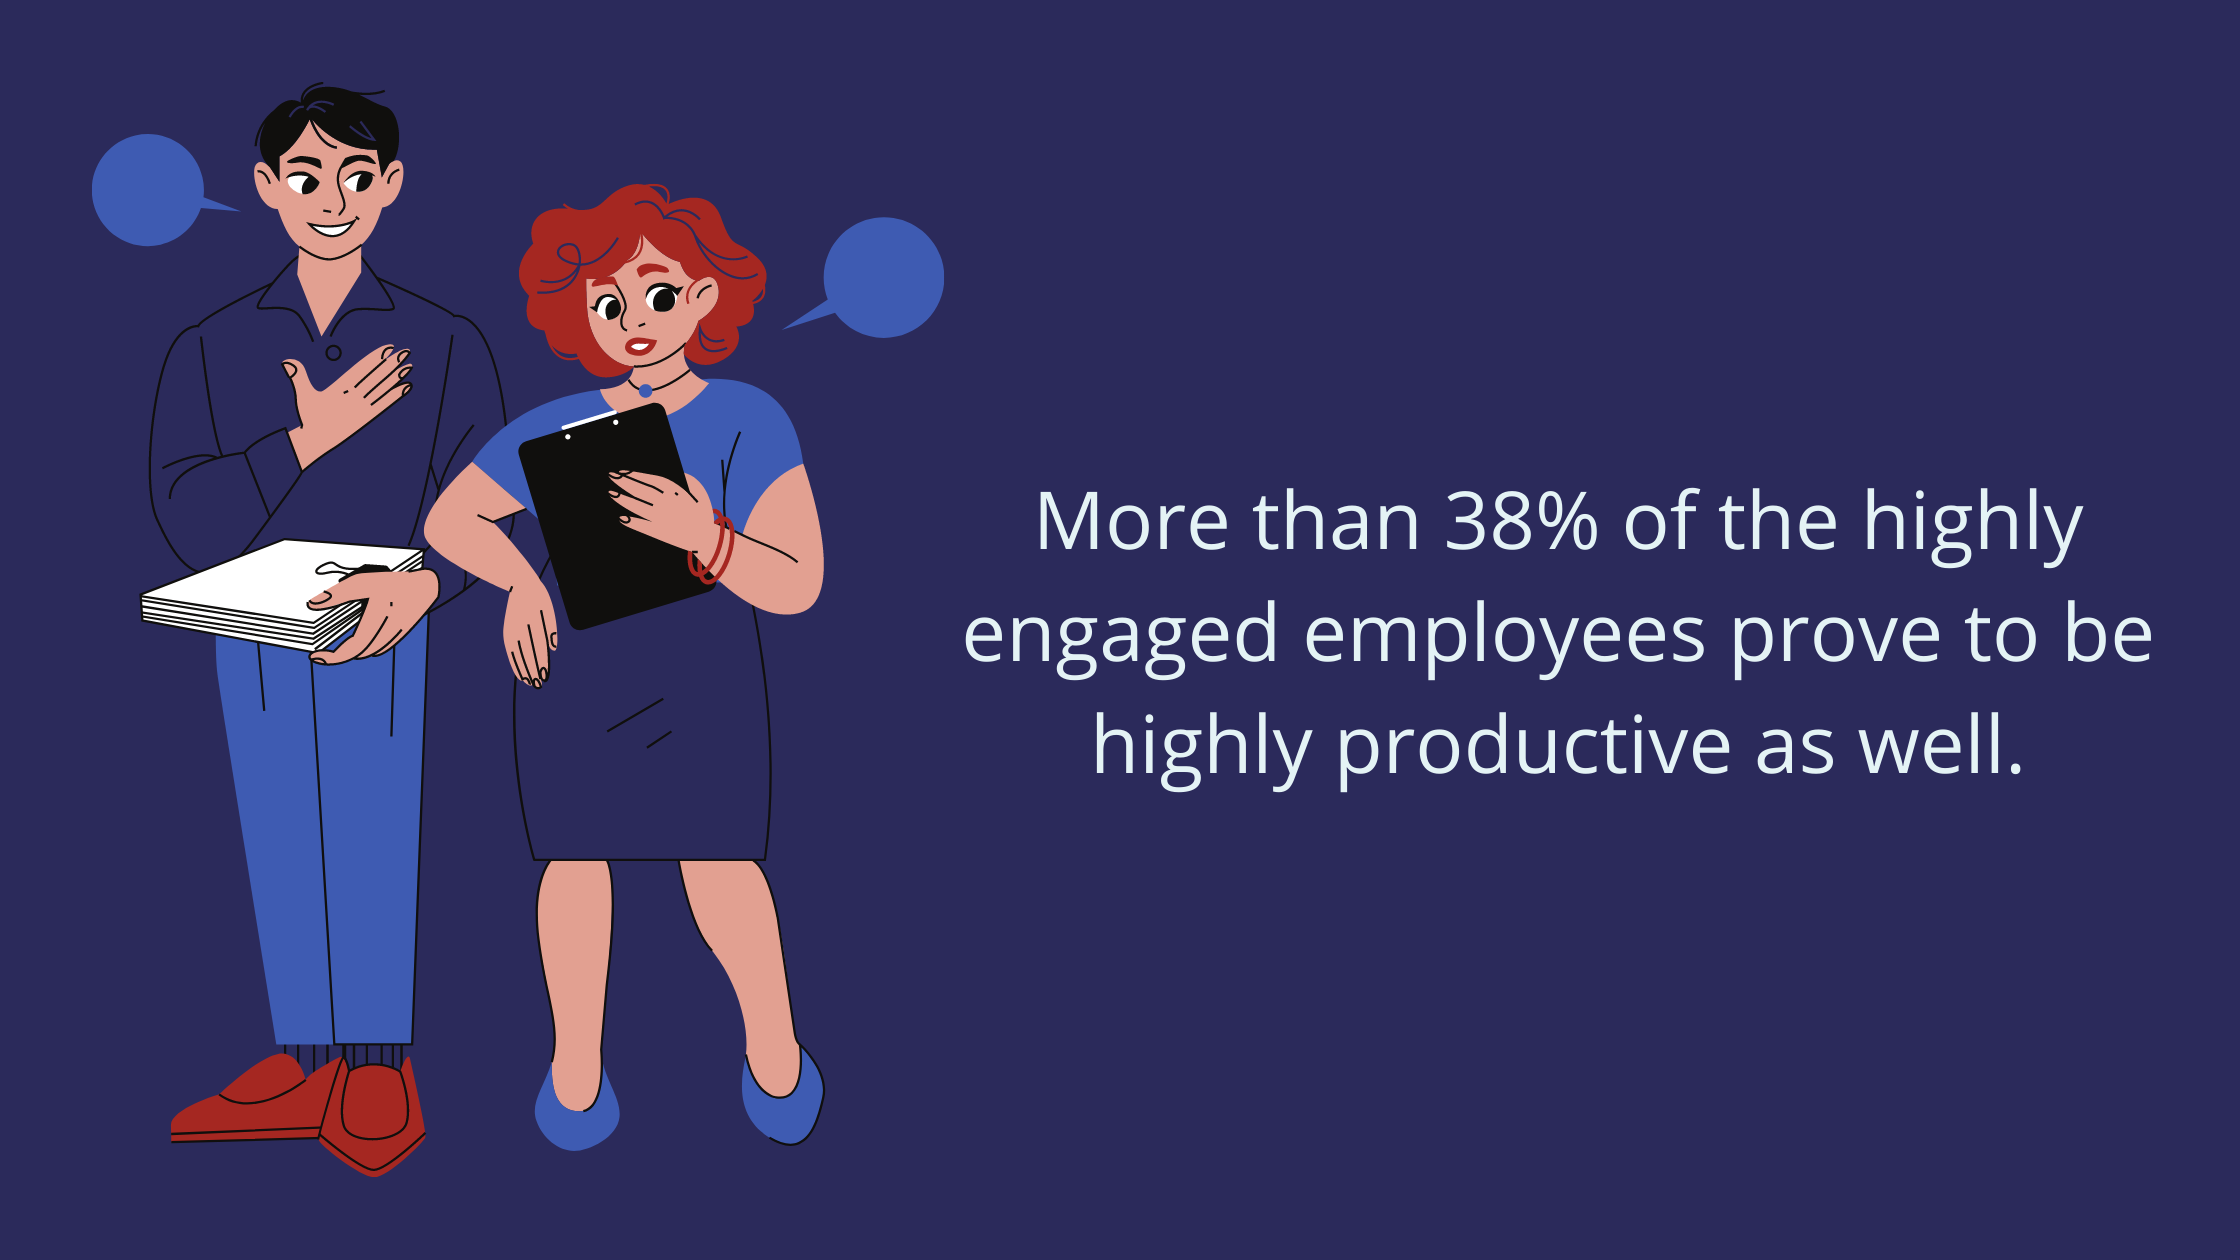 Workplace productivity stats on employee engagement